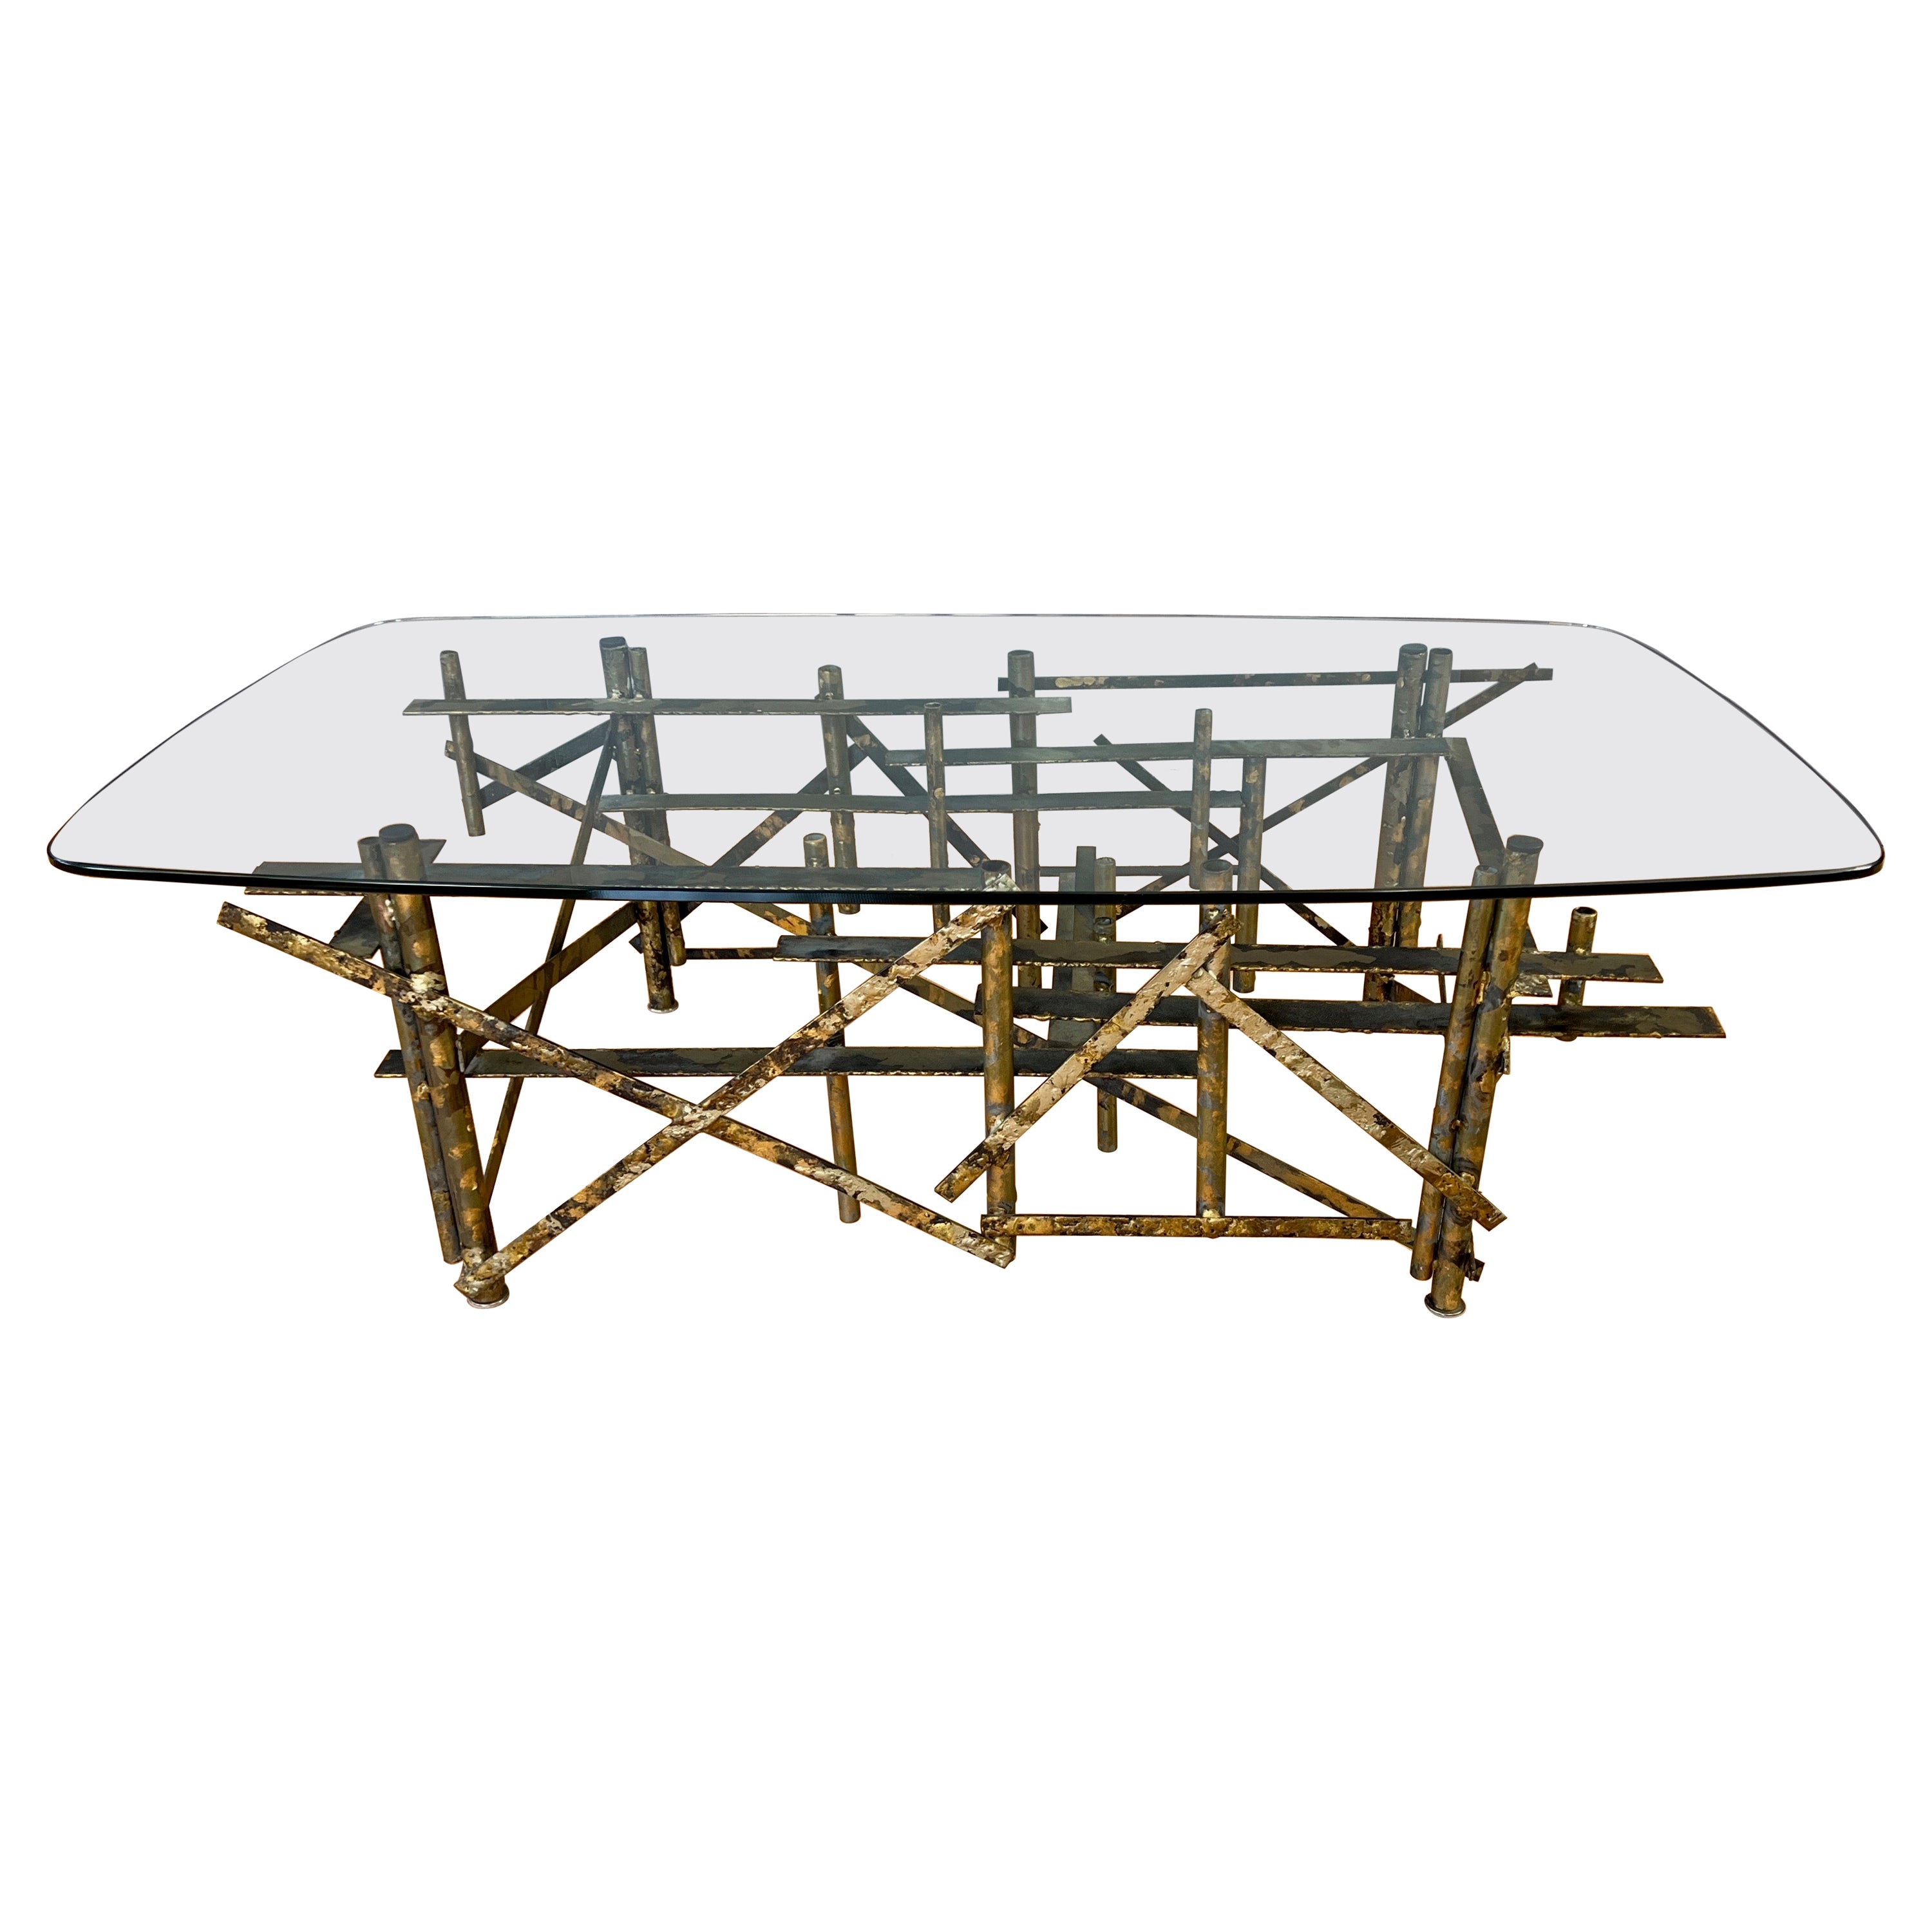 Silas Seandel-Style Brutalist Coffee Table with Painted and Gilt Finish, 1970s For Sale